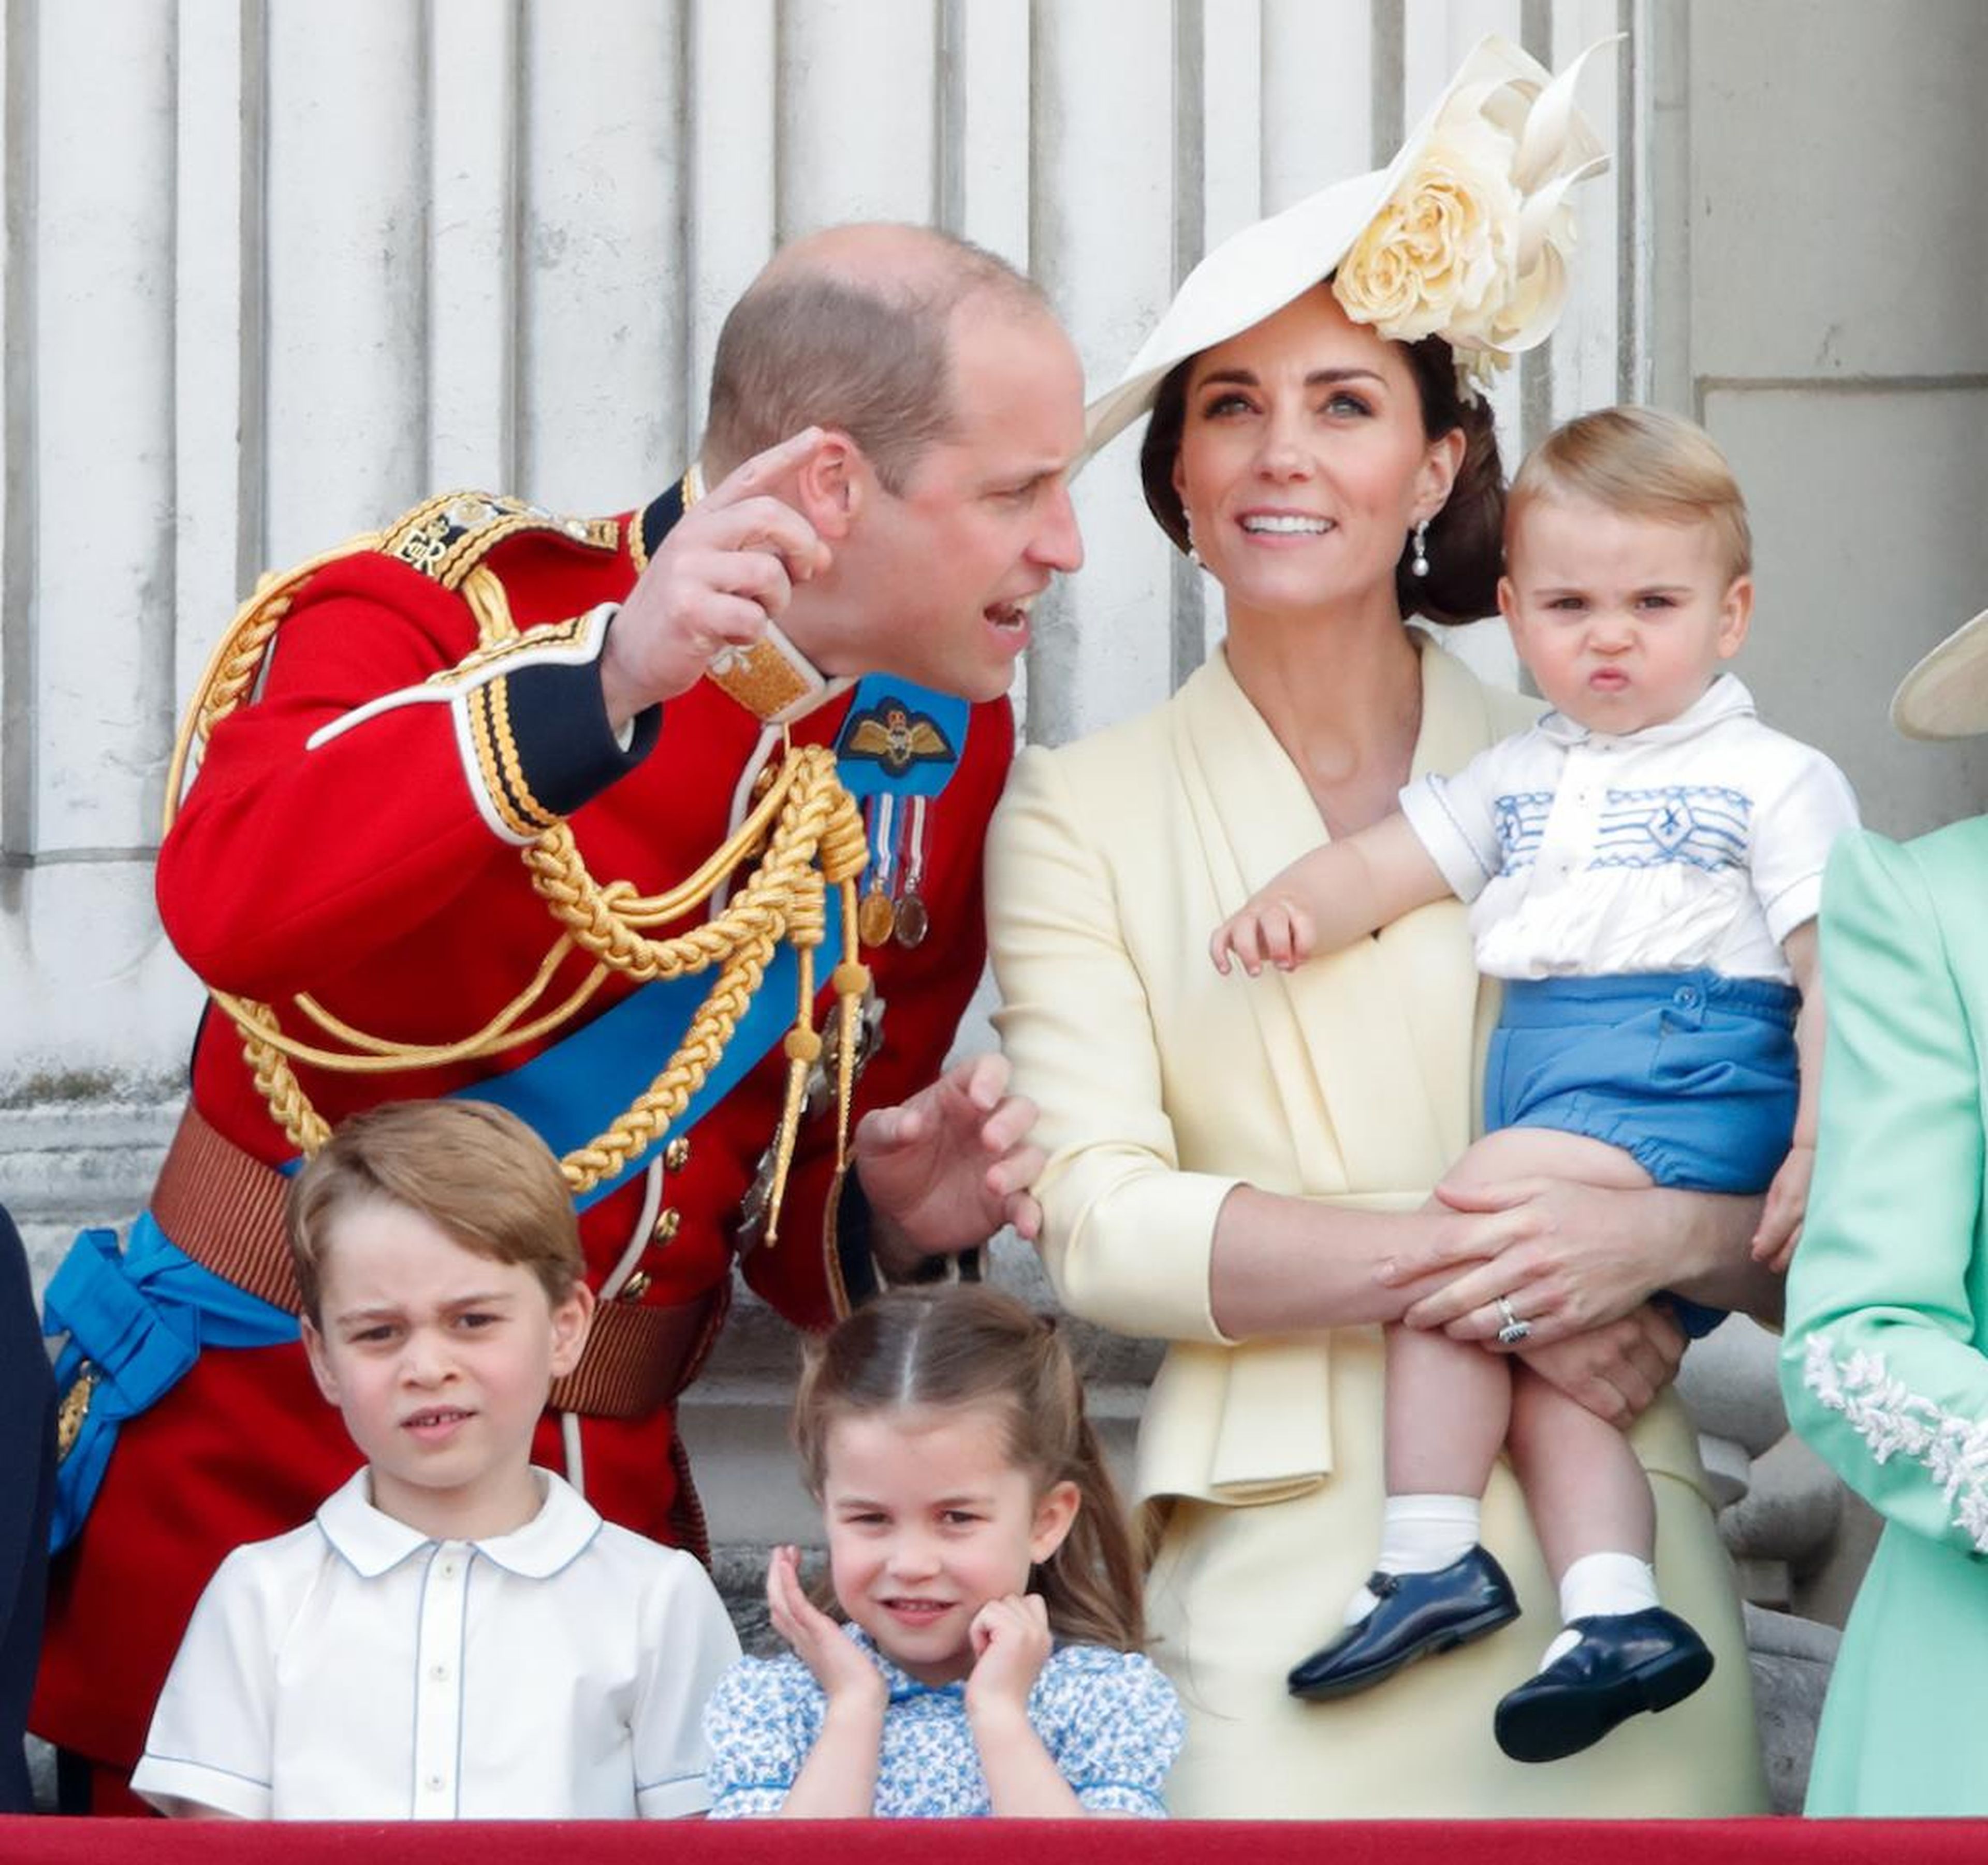 The event marked Prince Louis' first royal appearance, and the little one didn't look too impressed as he watched with his parents from the Buckingham Palace balcony.